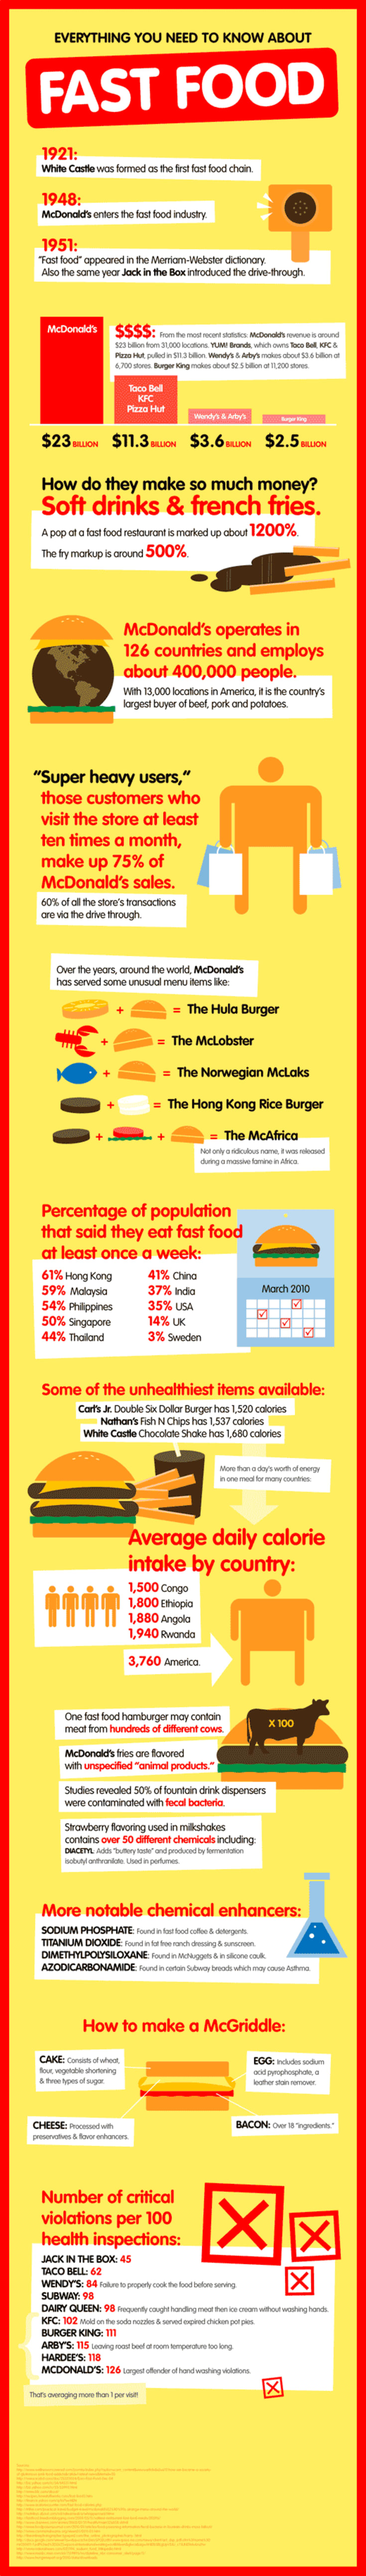 Everything You Need to Know About Fast Food (Image) - mindbodygreen